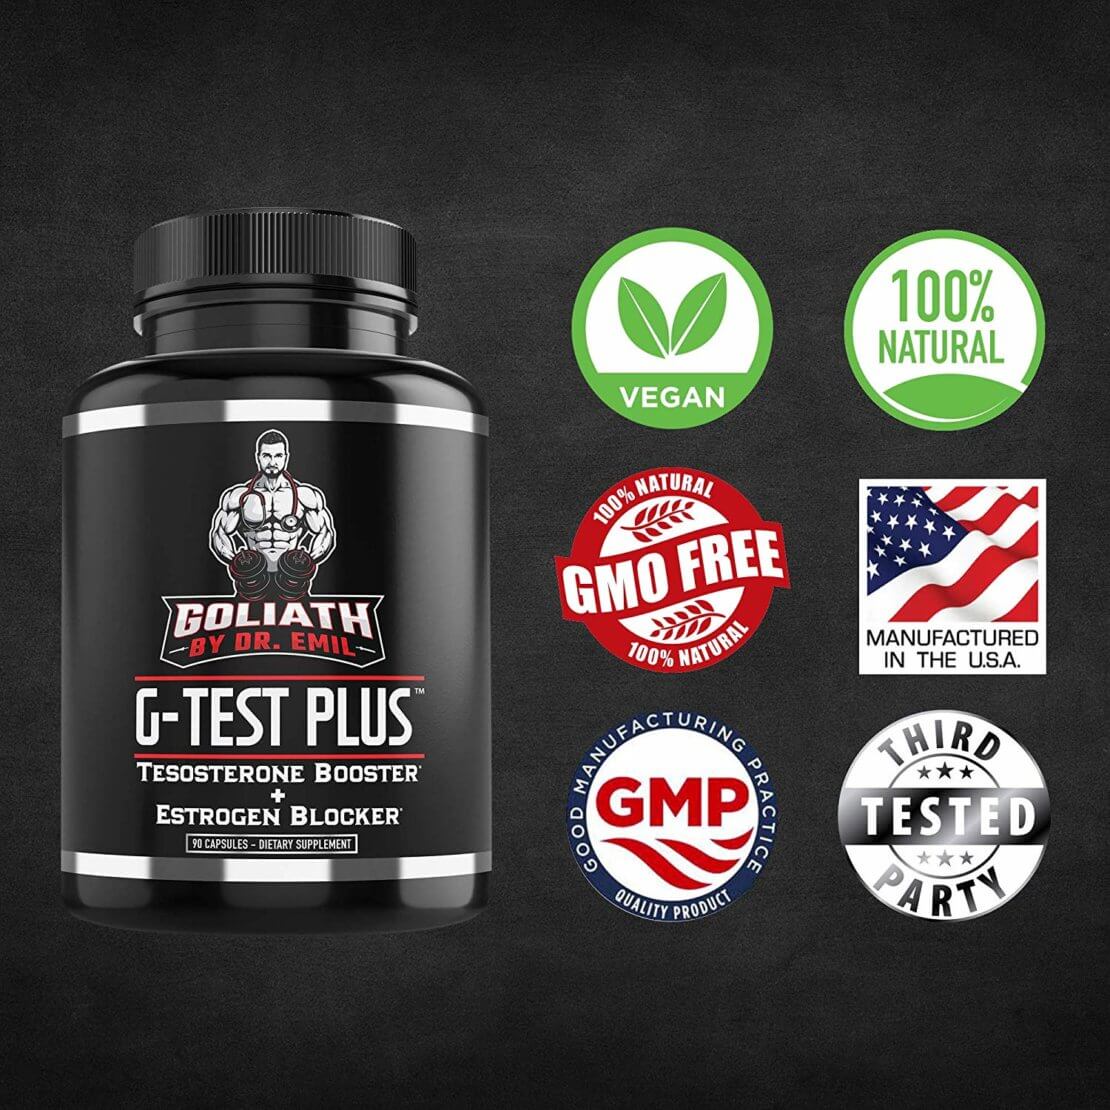 Best Testosterone Boosters of 2020